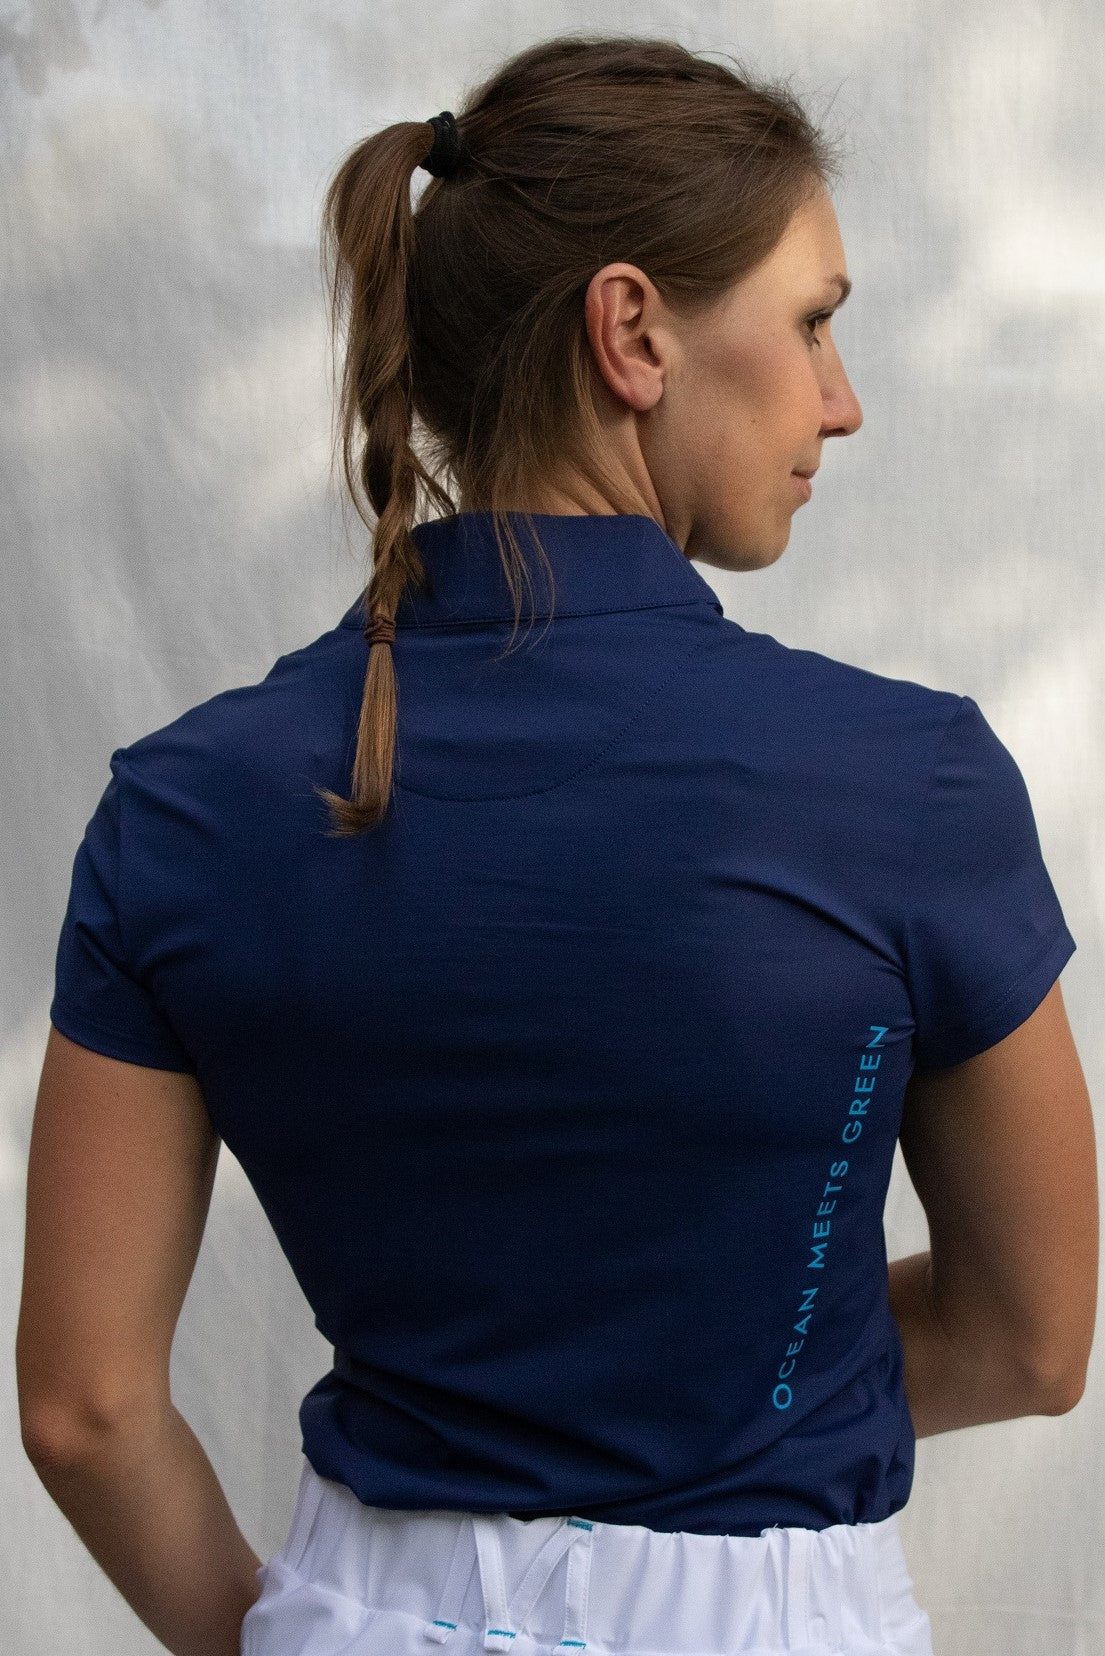 Full body image of Ocean Meets Green women's golf polo Moana in navy worn by a woman, showing the side logo